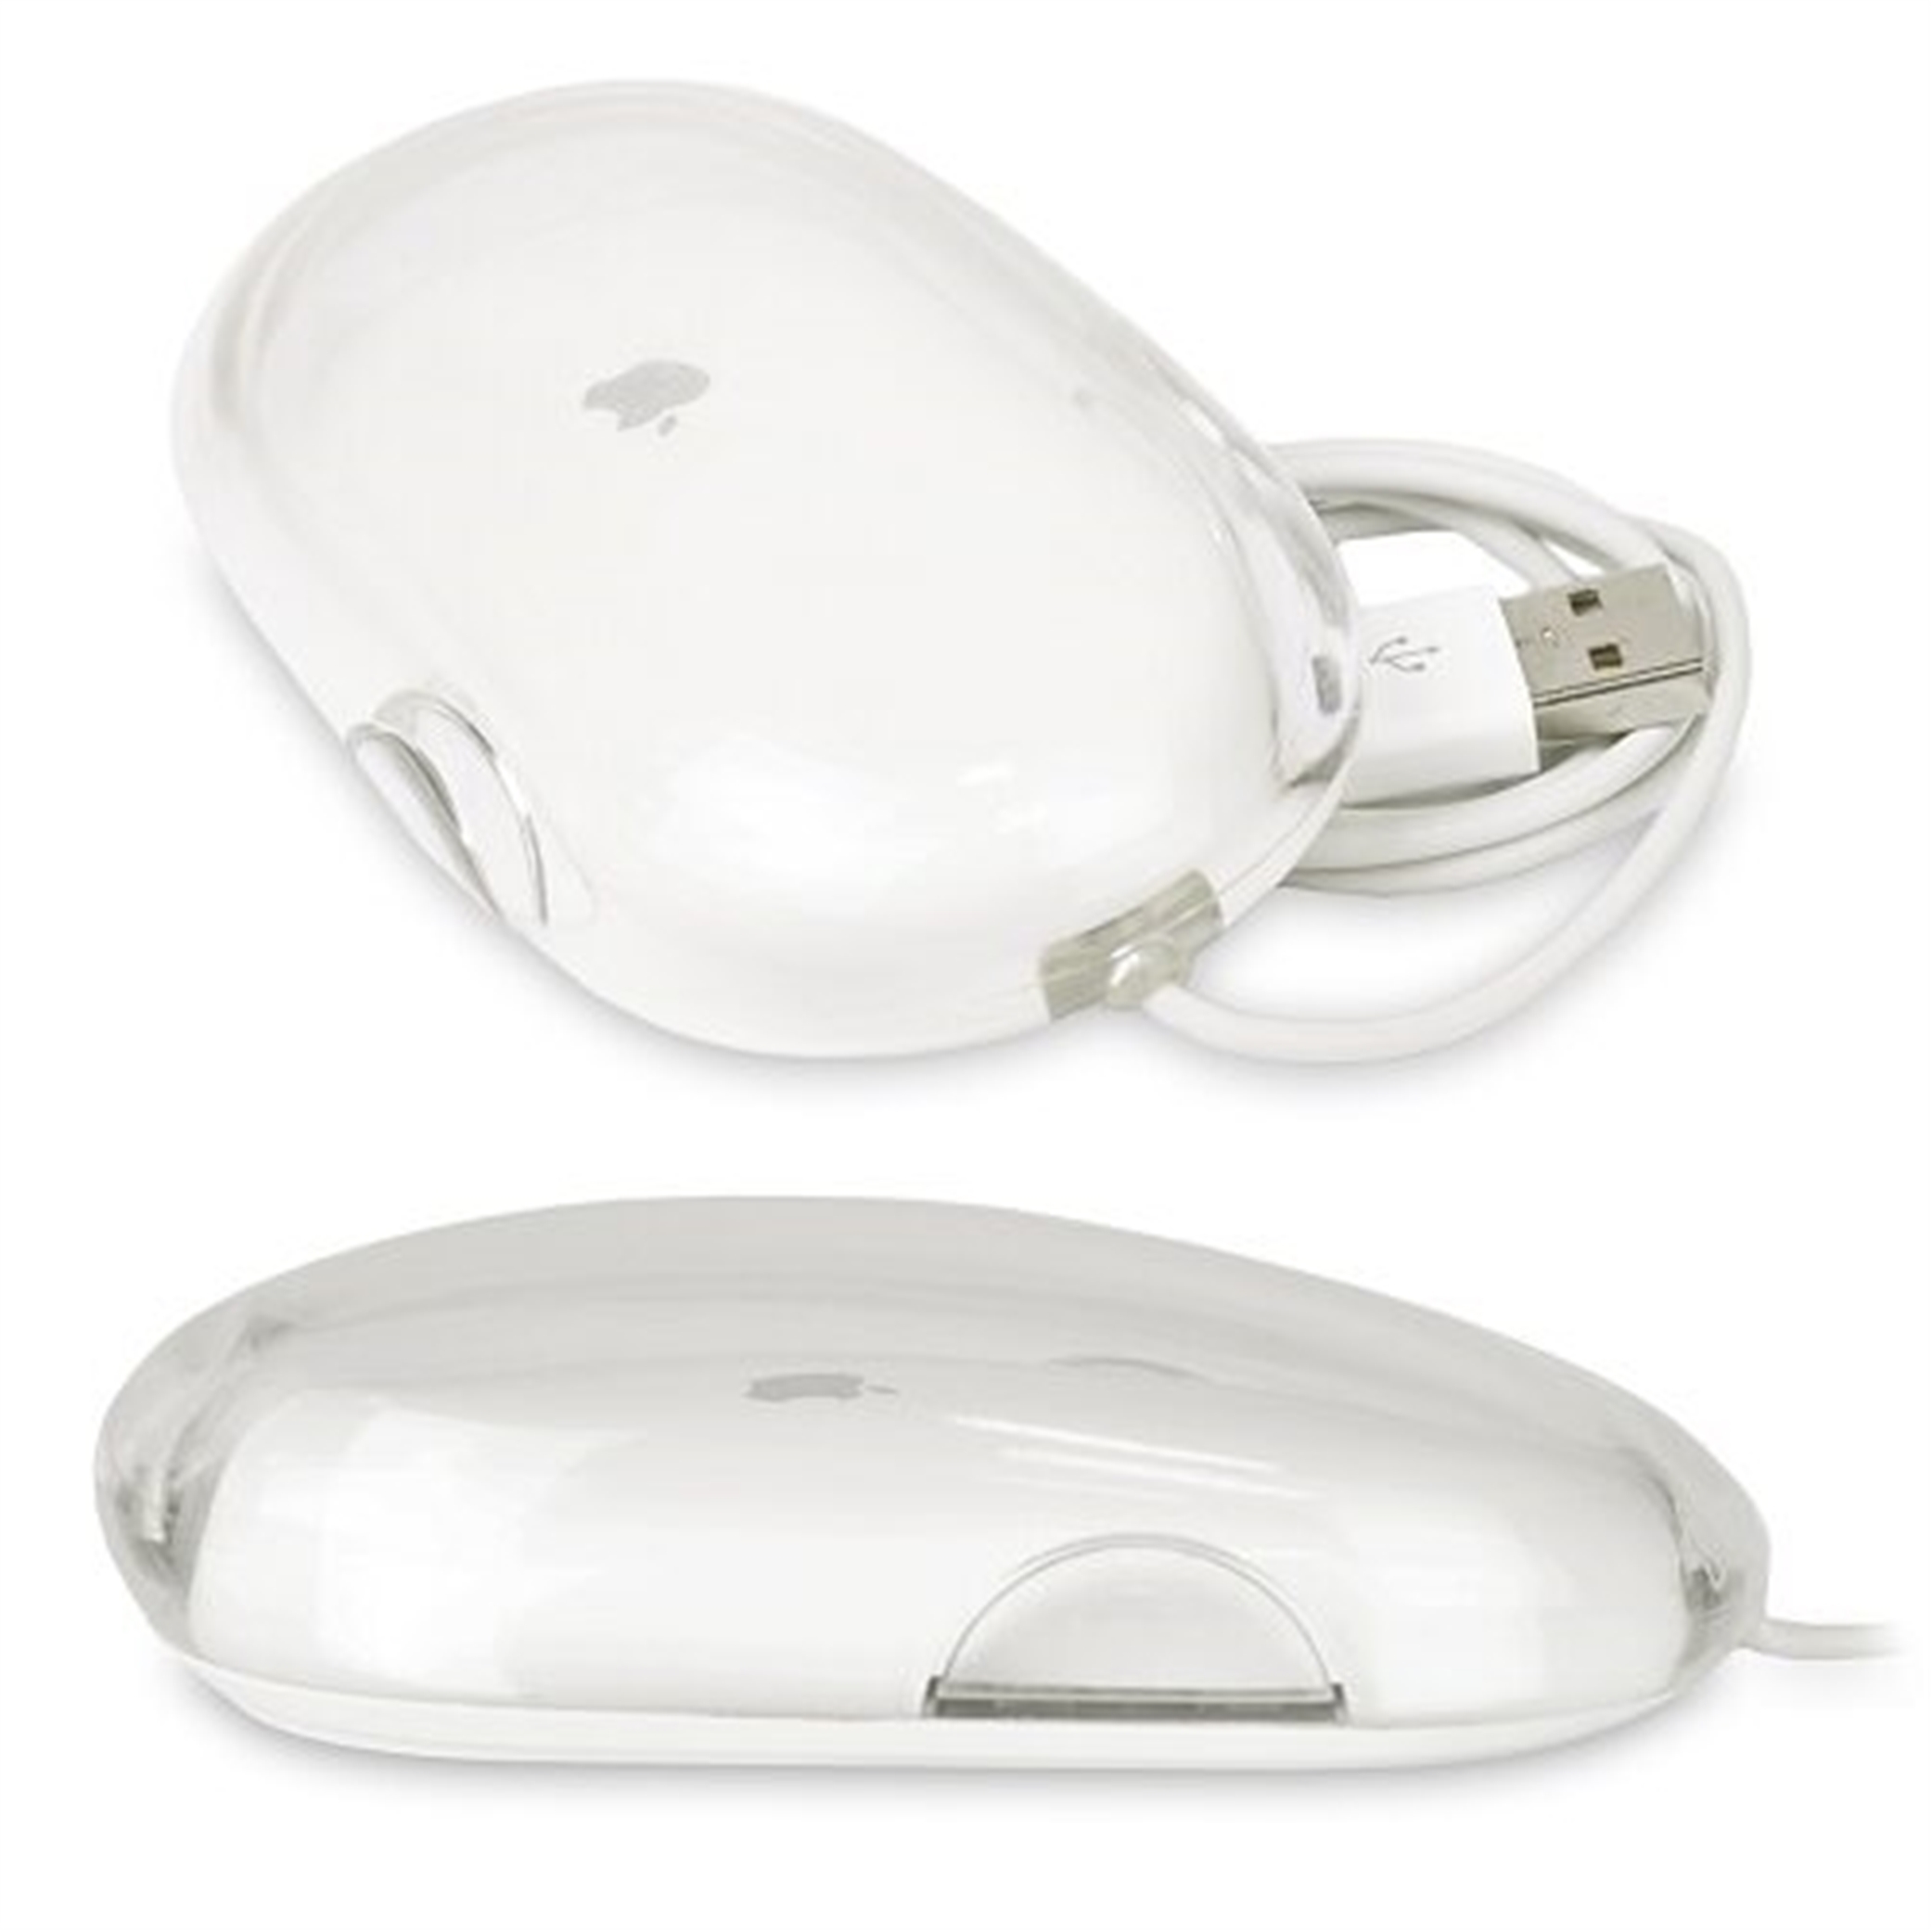 Apple Pro M5769 Mouse White/Clear (Used) - image 2 of 3